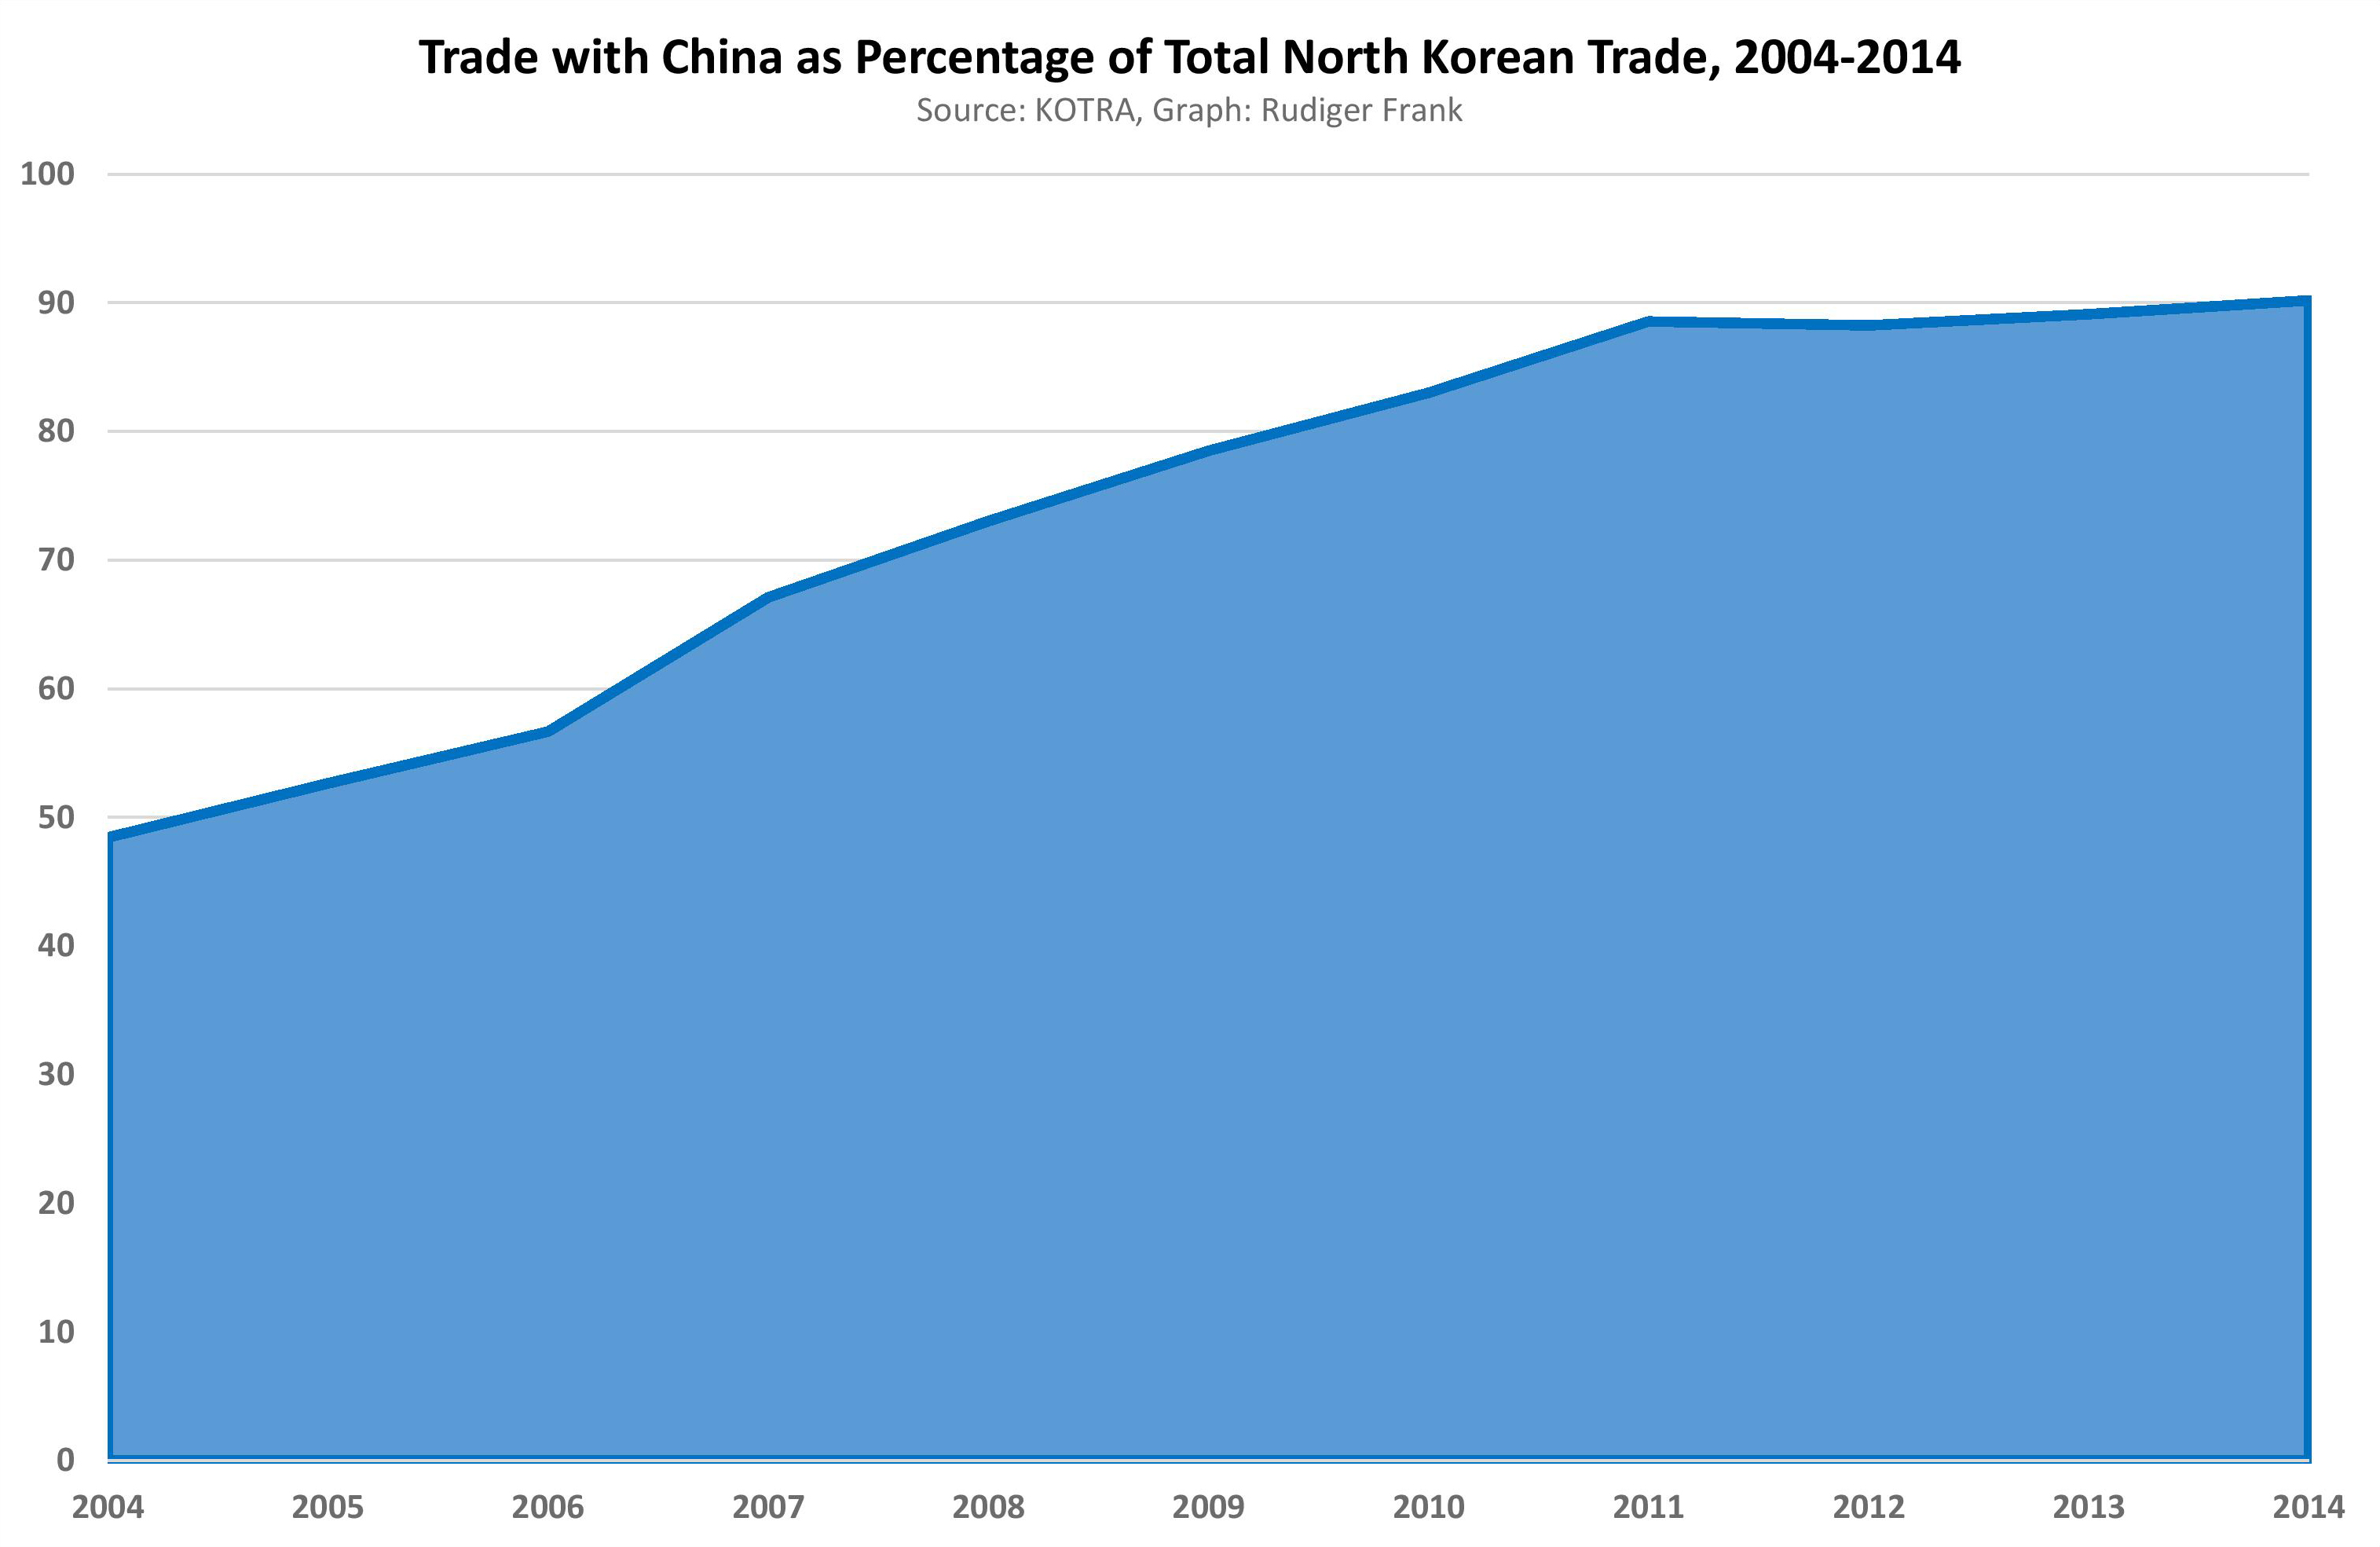 Graph 5. Trade with China as Percentage of Total North Korean Trade, 2004-2014.